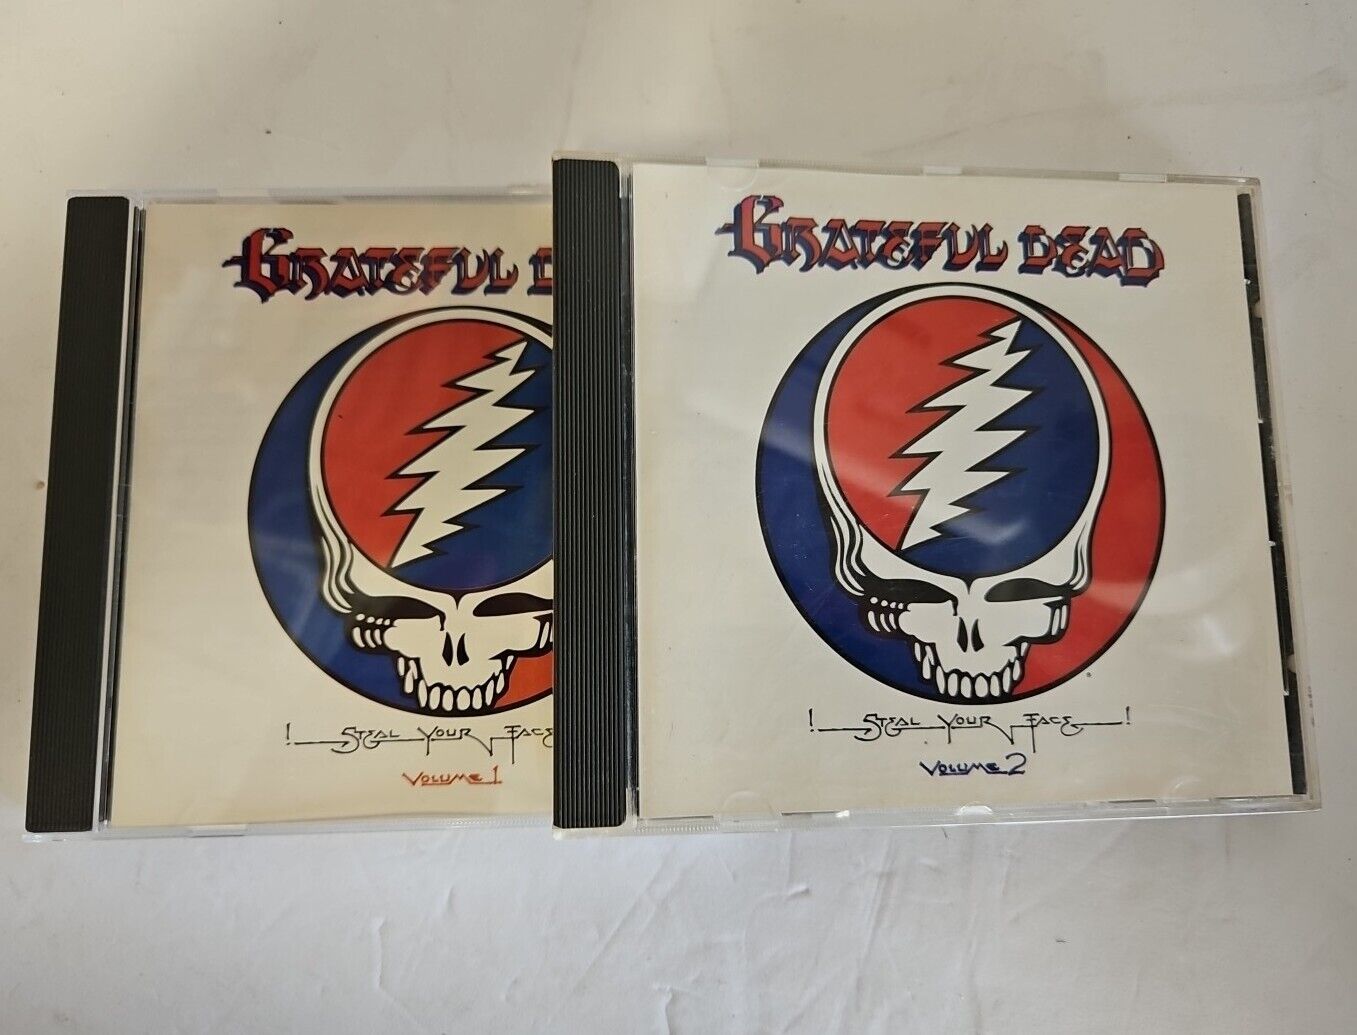 GRATEFUL DEAD - Steal Your Face Volumes 1 & 2  Garcia Used